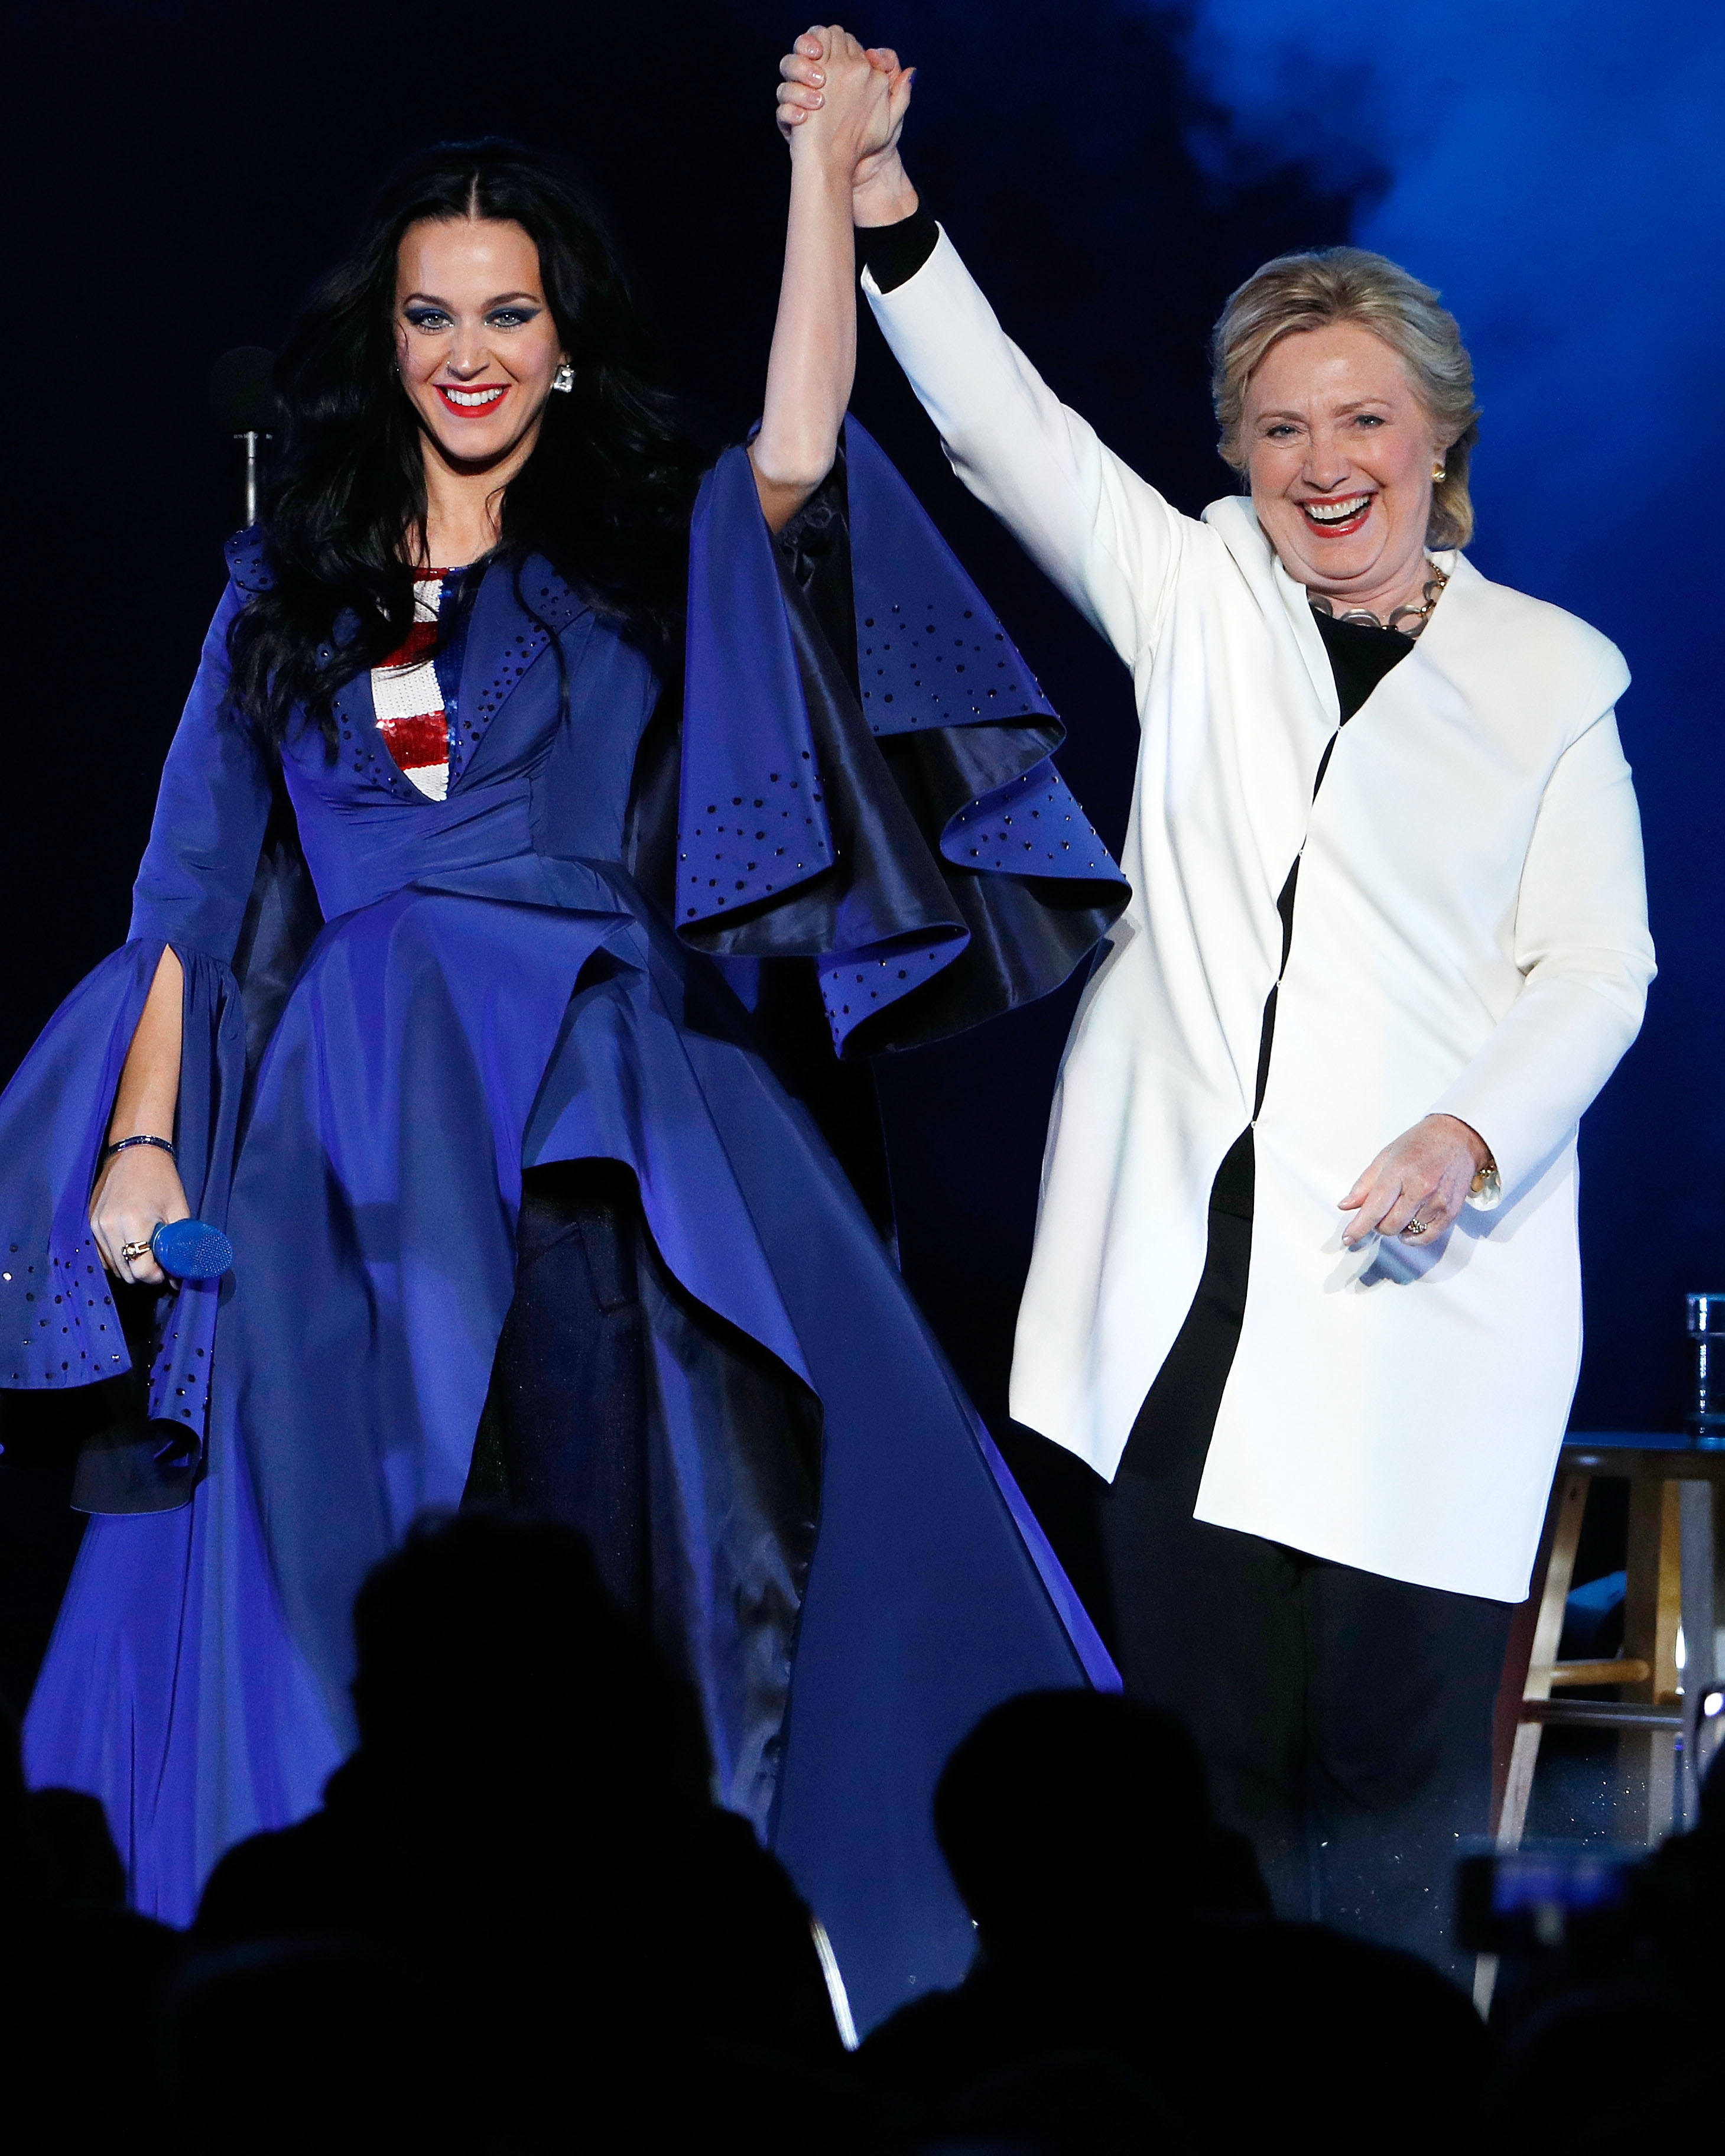 Katy Perry with Hillary Clinton on stage